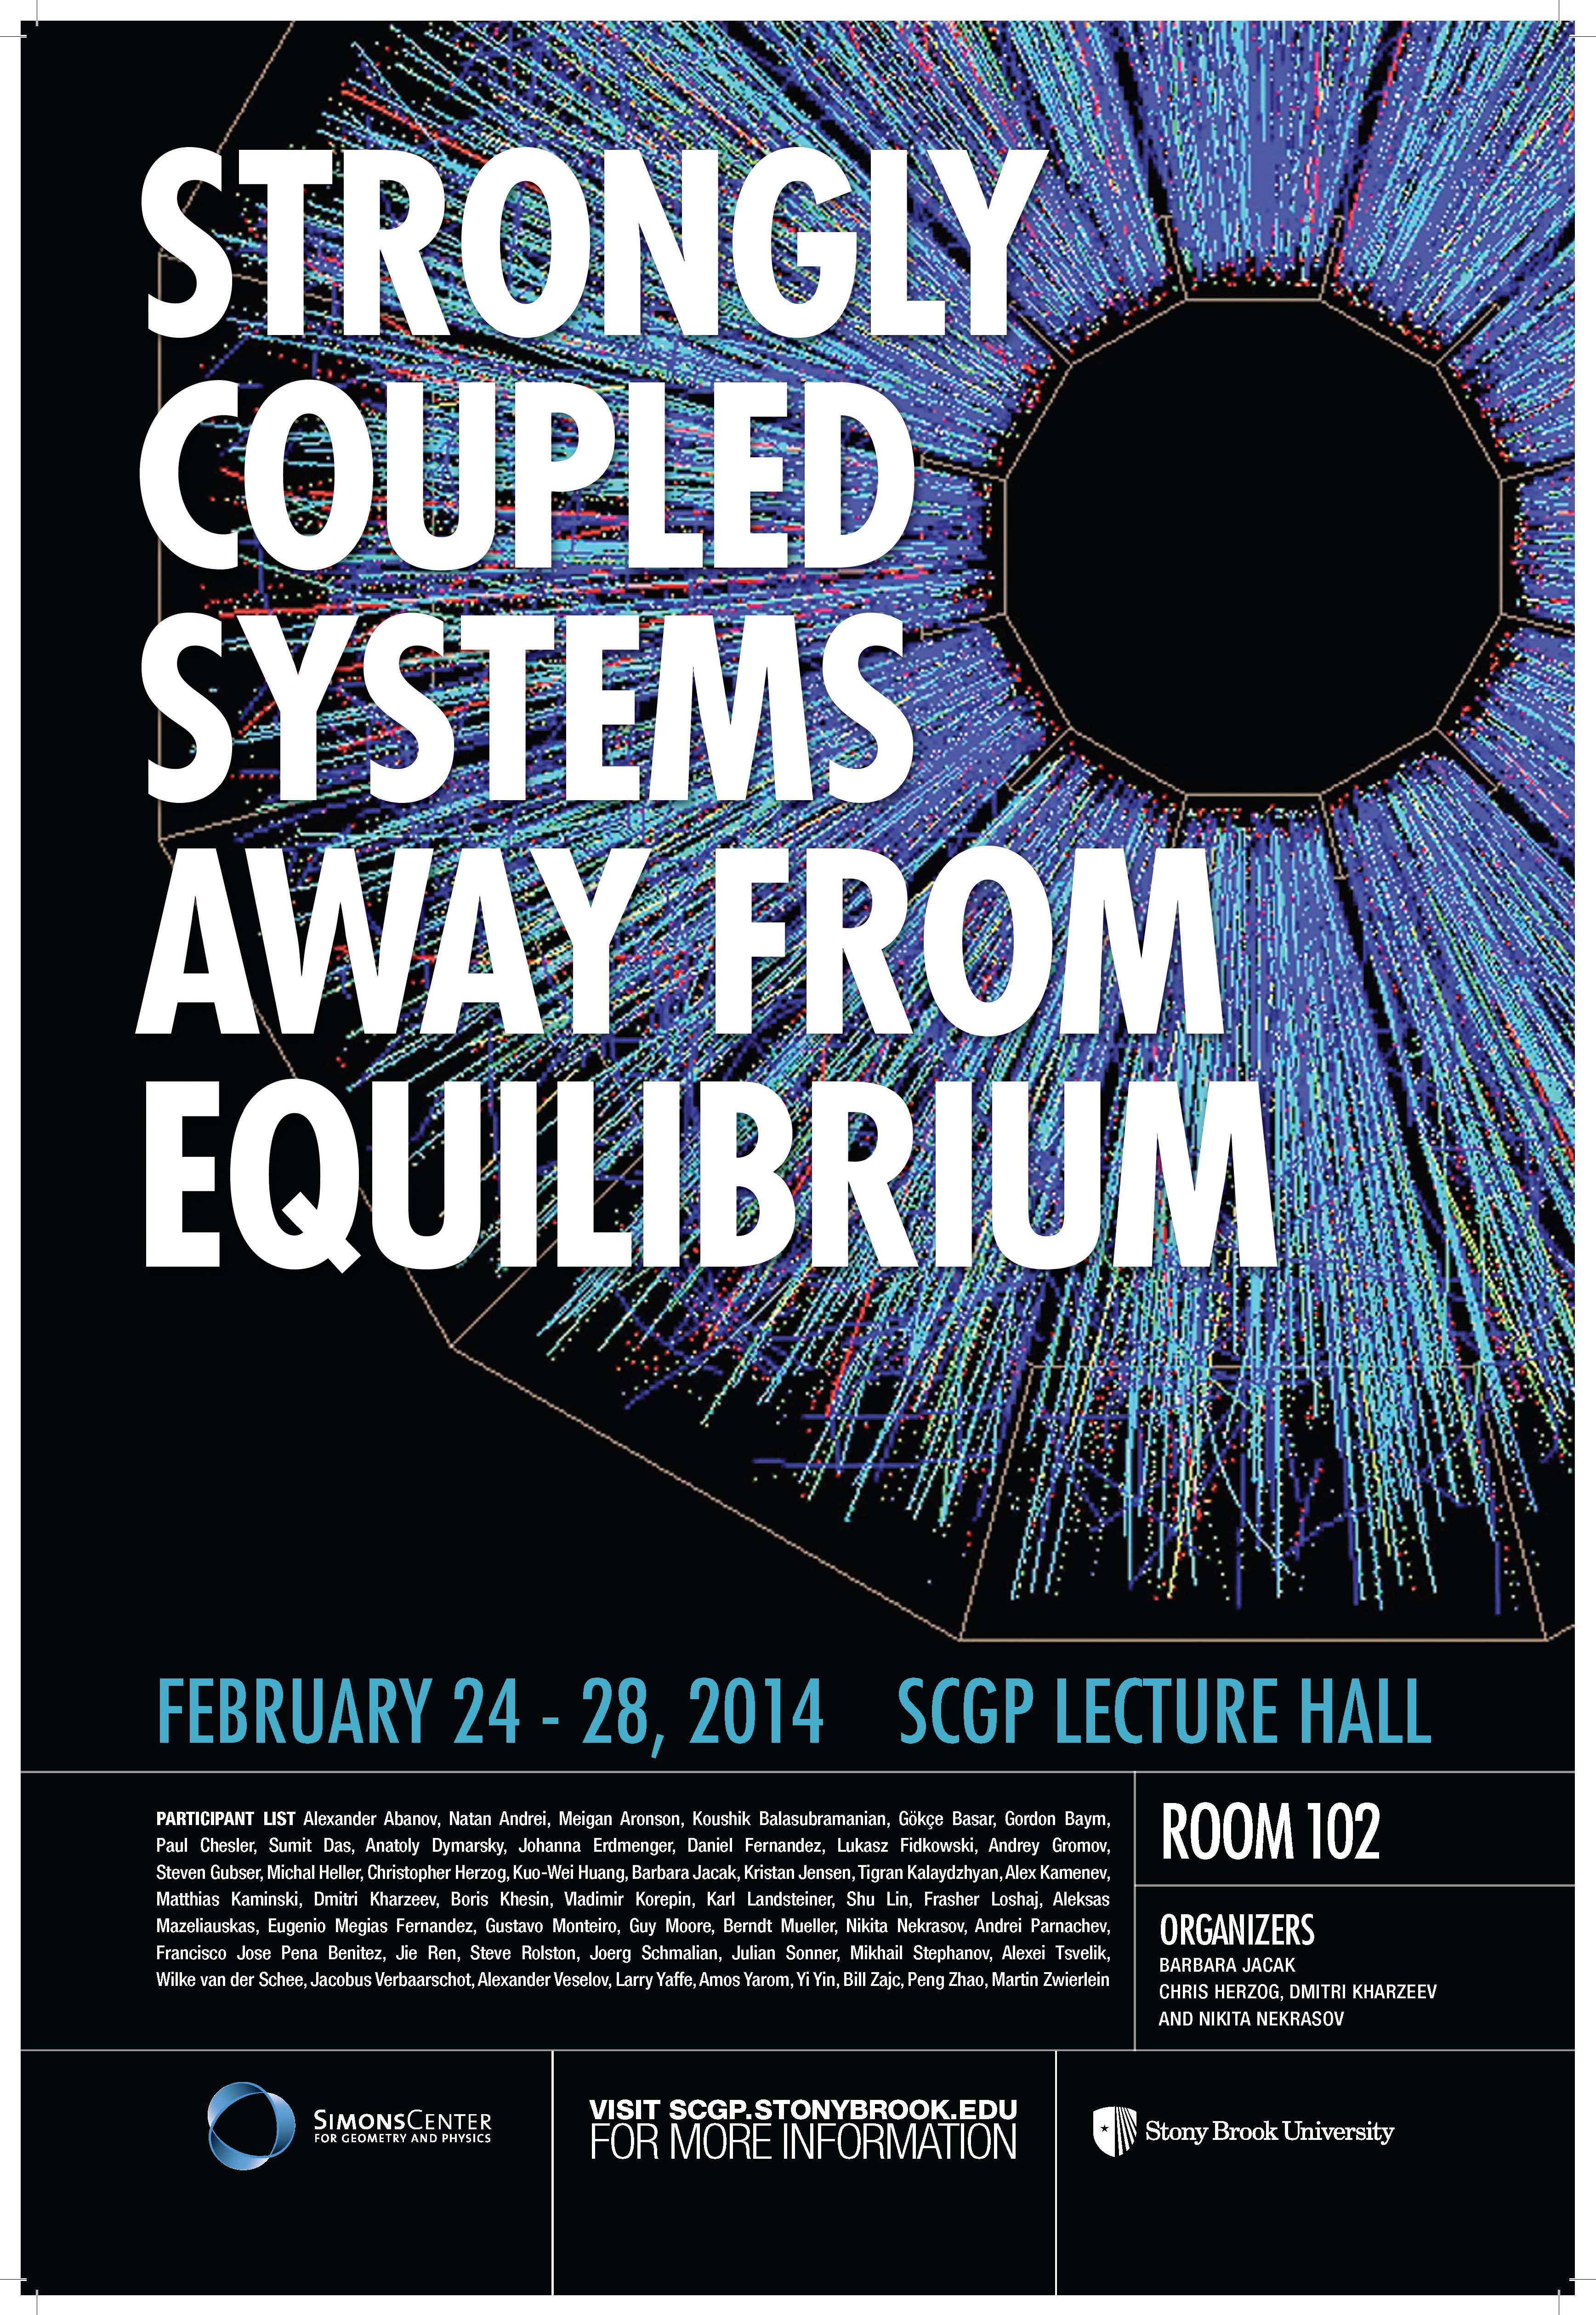 coupled-systems-poster-11x17-4-press-1